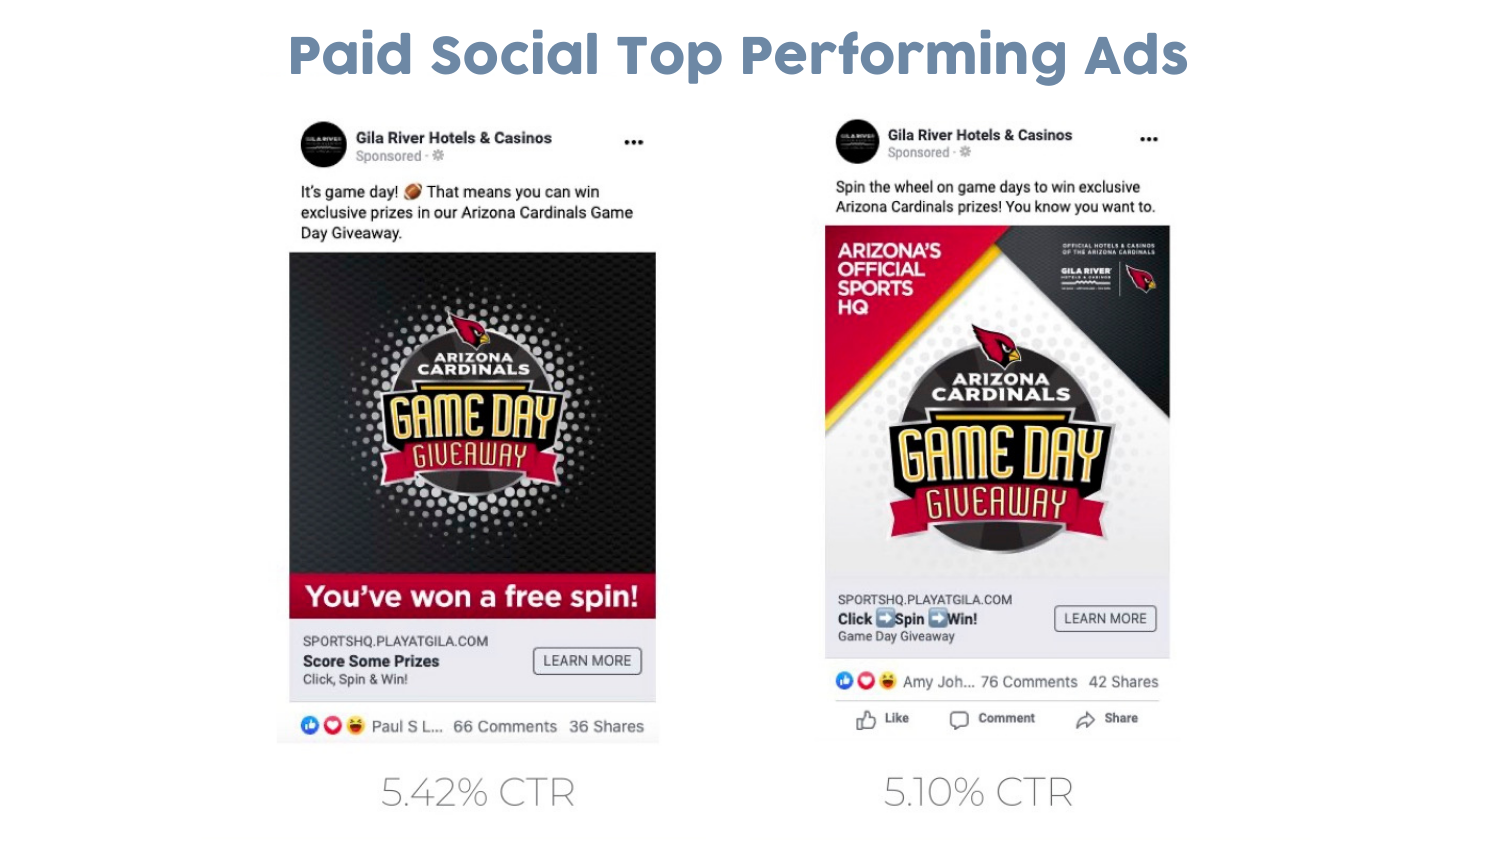 5% CTR on Facebook Ads for the Spin-to-Win with Tradable Bits